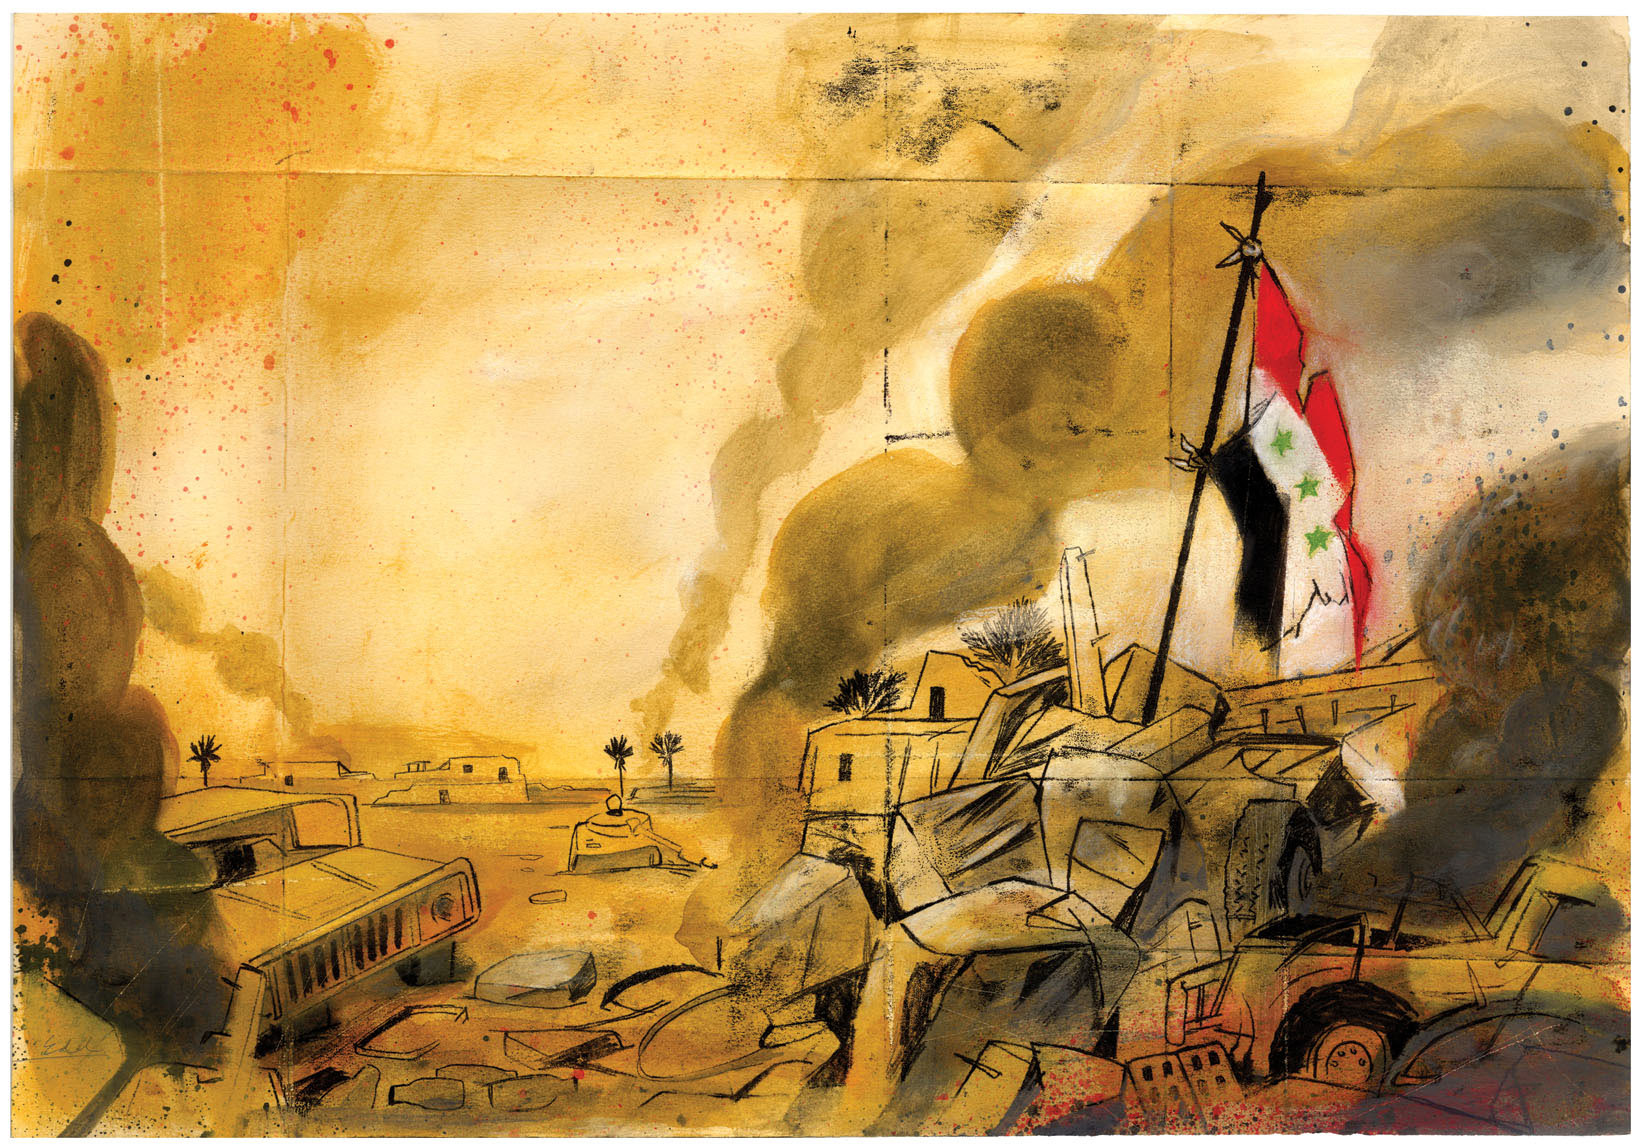 Iraq War Painting at Explore collection of Iraq